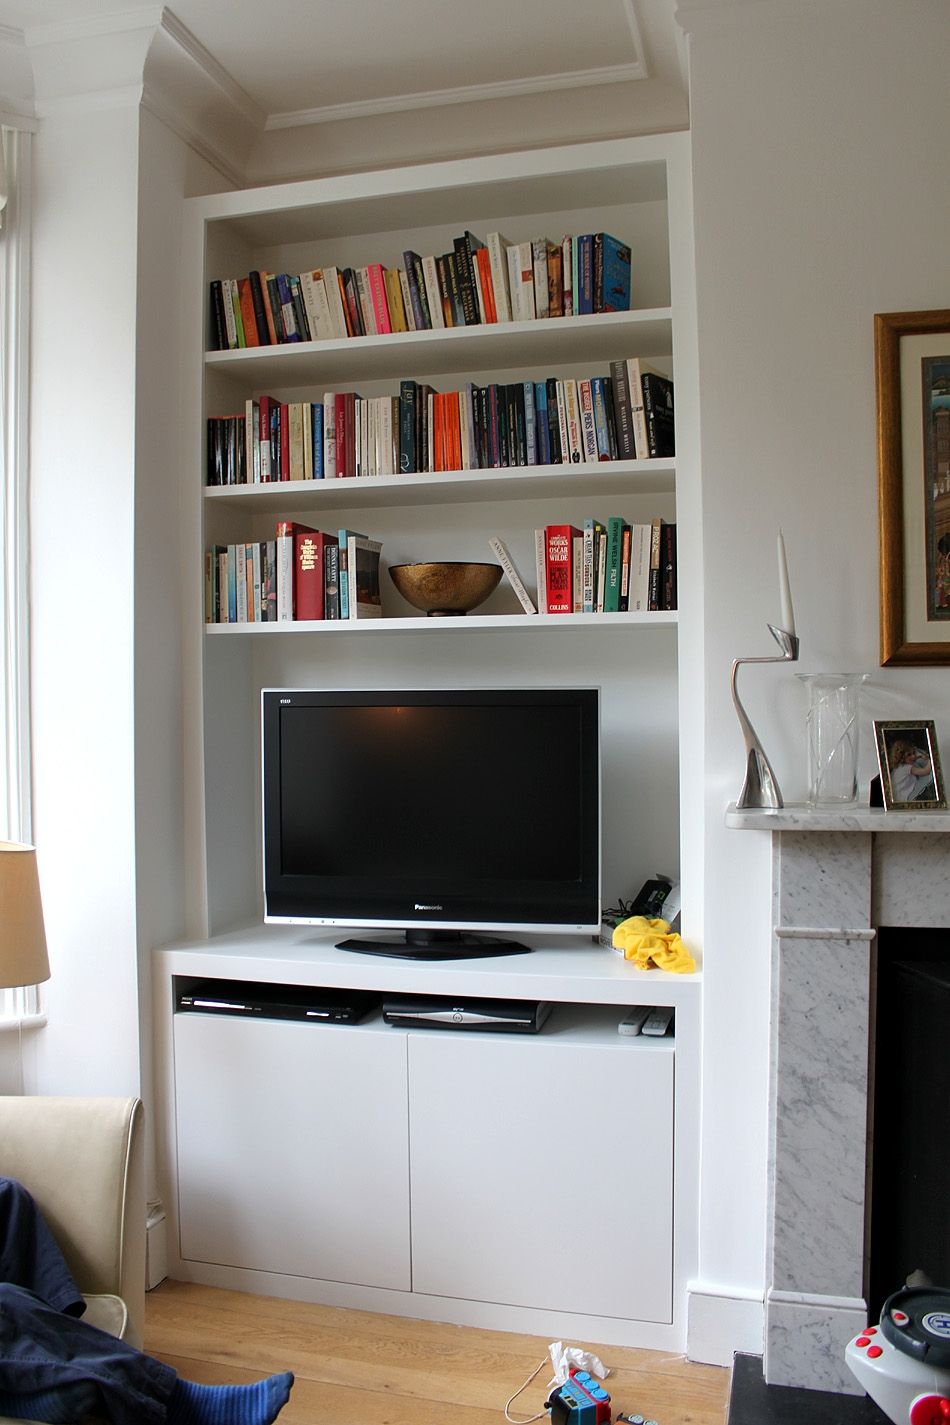 Fitted Wardrobes Bookcases Shelving Floating Shelves London Within Bookcases With Cupboards (View 6 of 12)